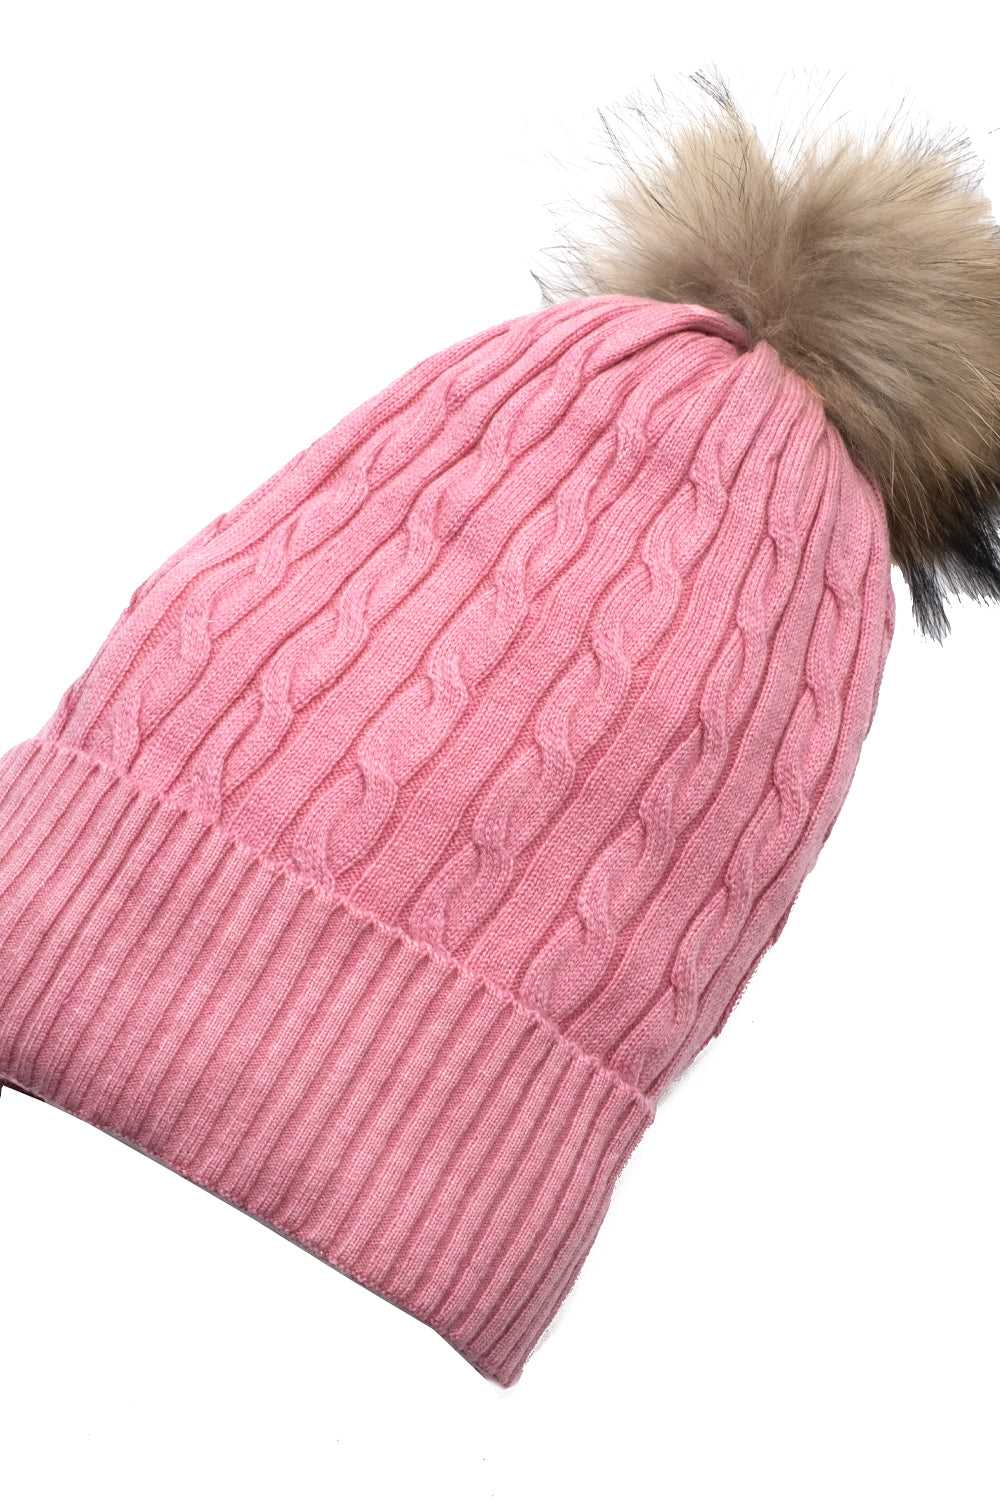 Cashmere and Wool Beanie Rose Pink Beanies